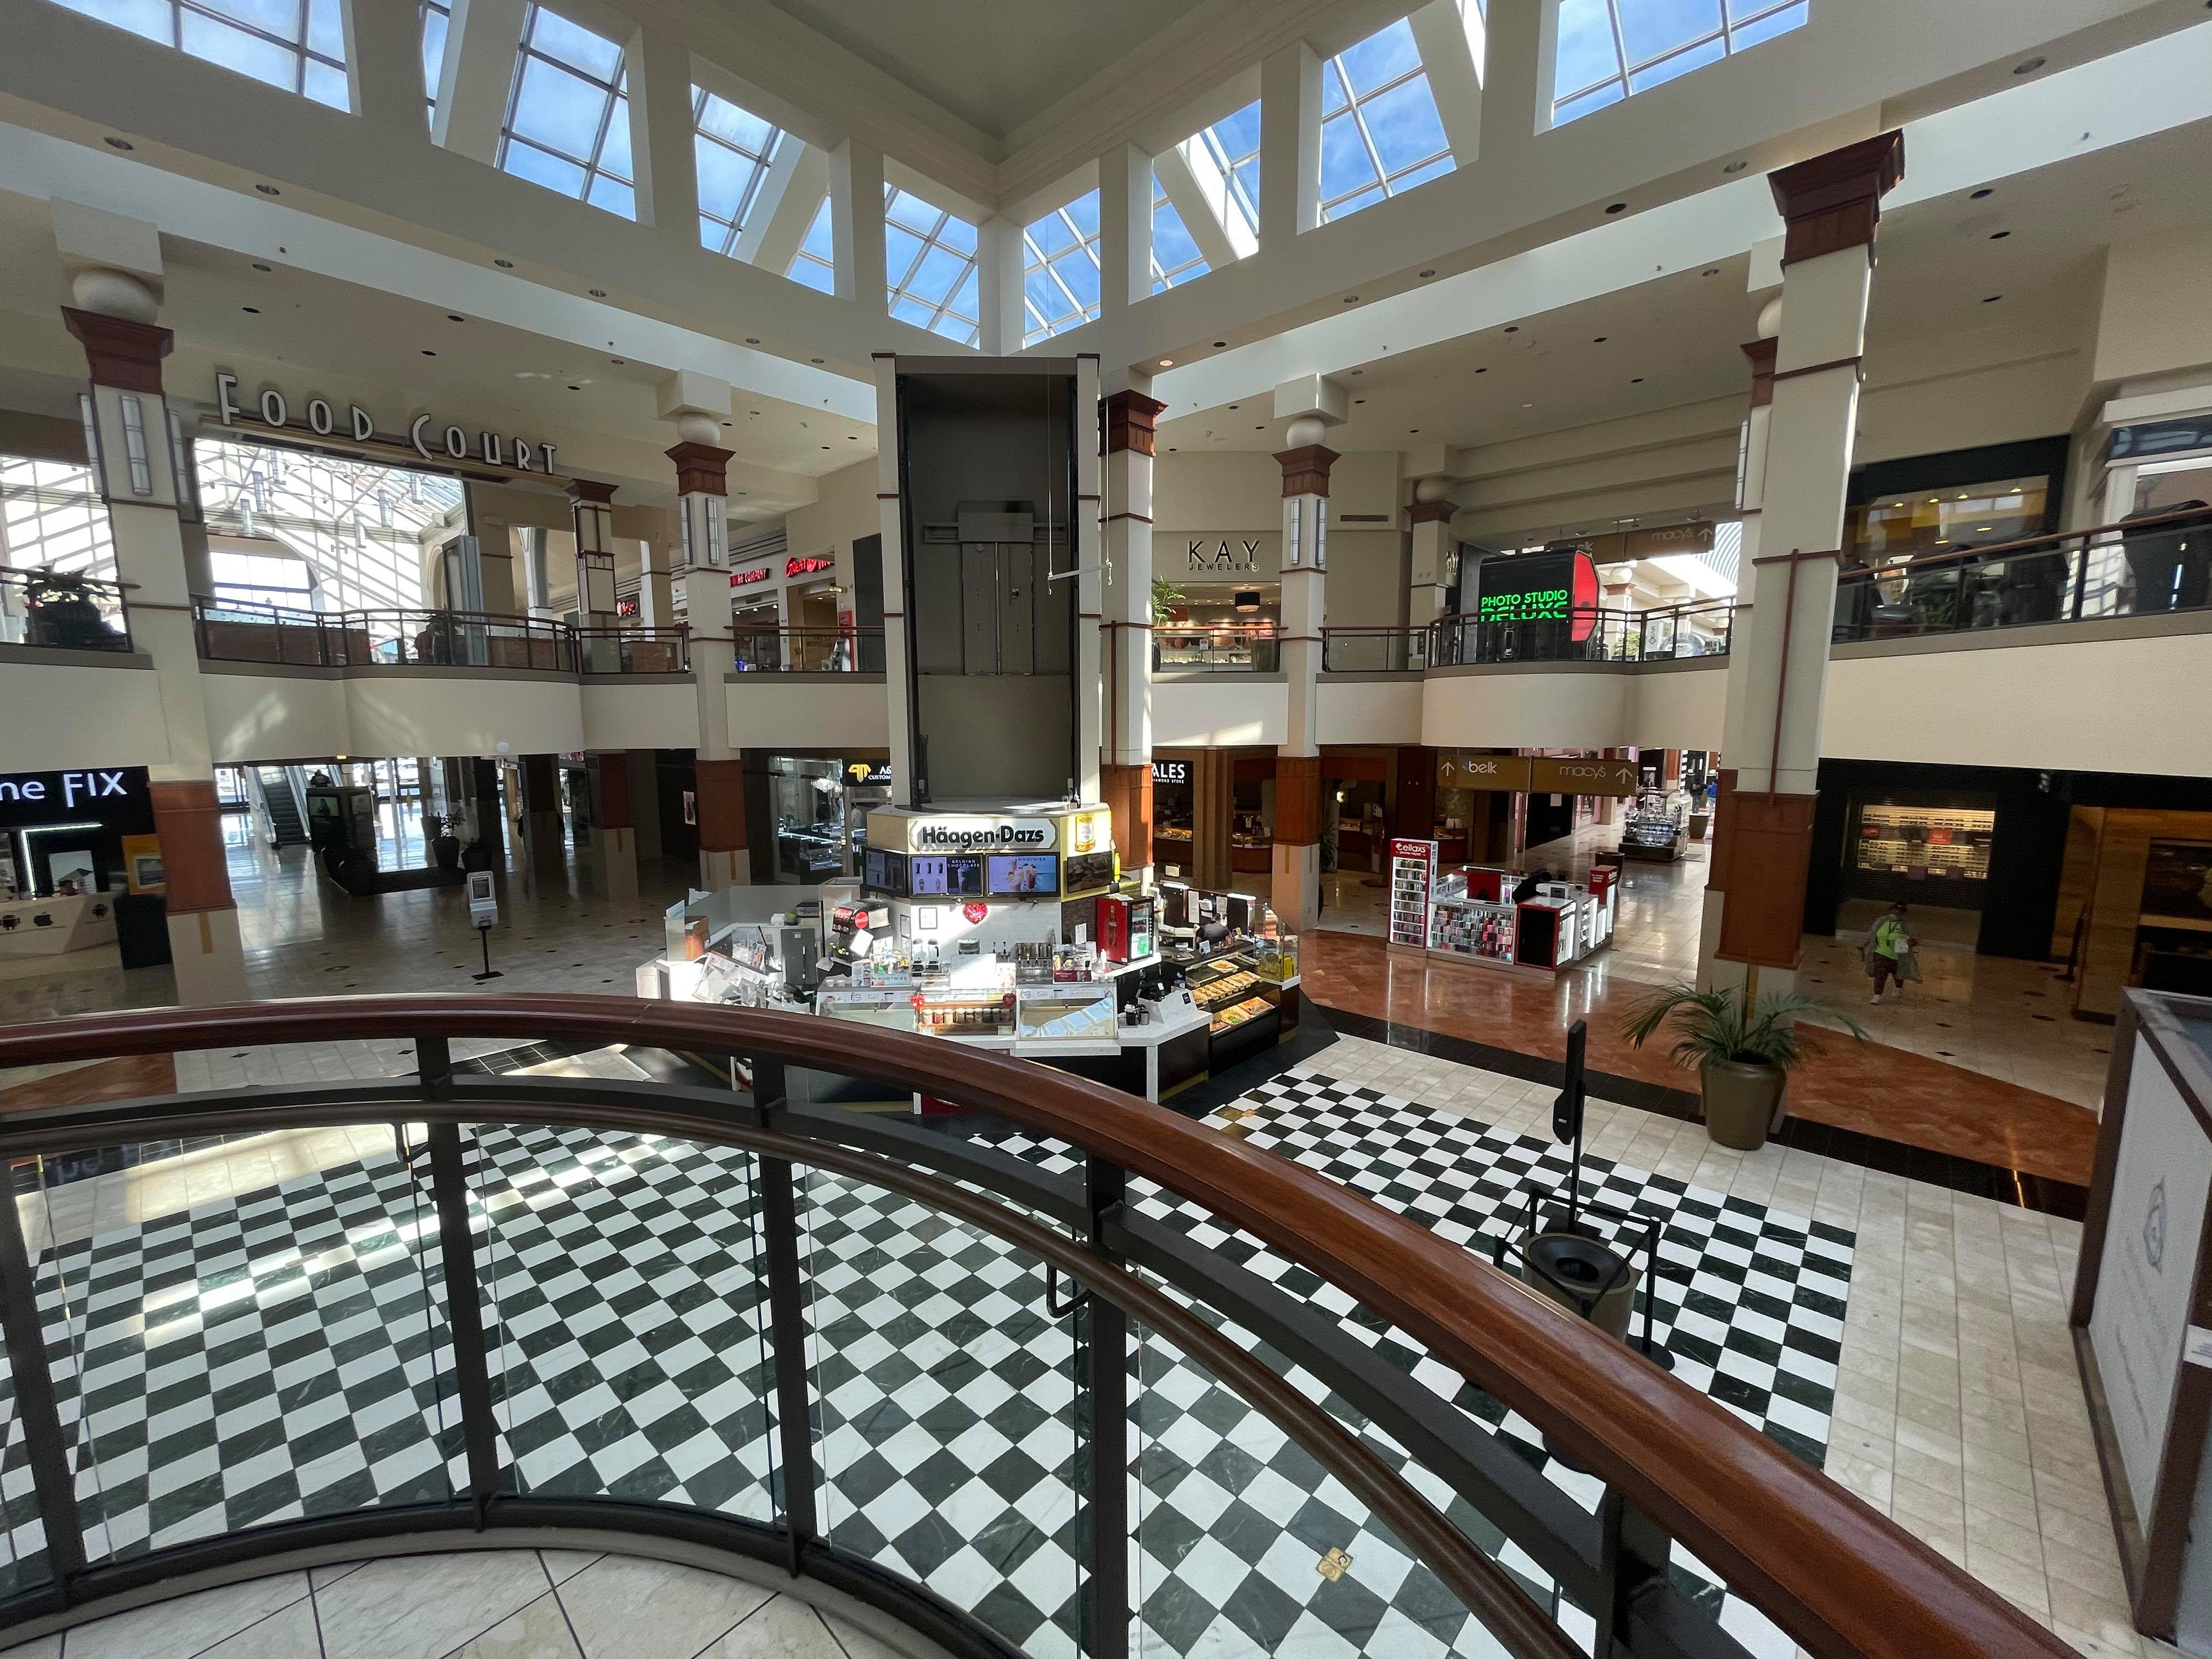 Town Center went into foreclosure but the Cobb County mall remains open